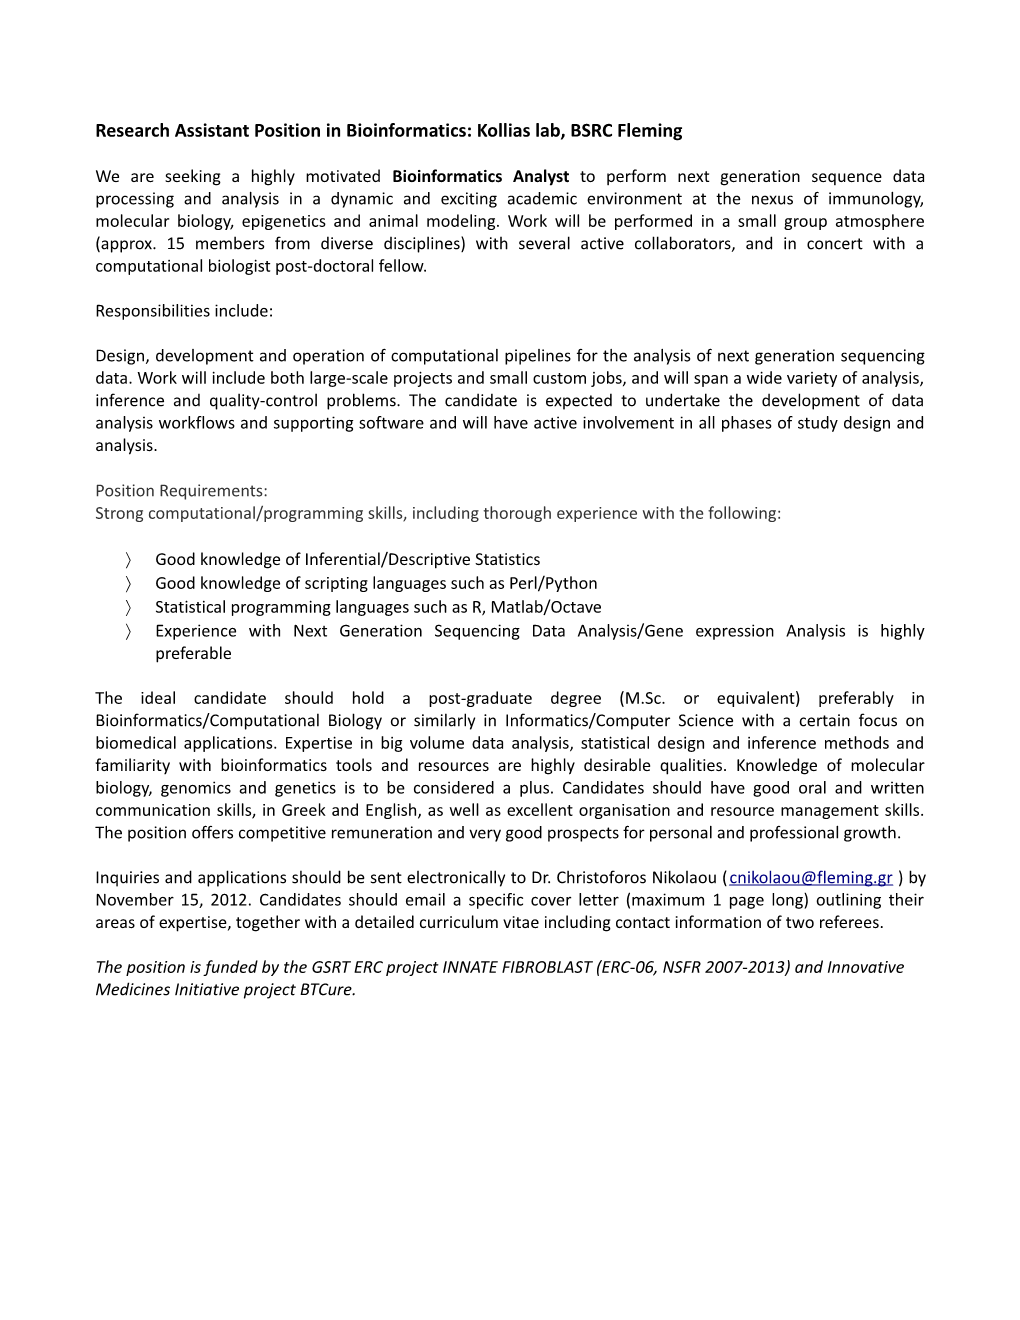 Research Assistant Position in Bioinformatics: Kollias Lab, BSRC Fleming